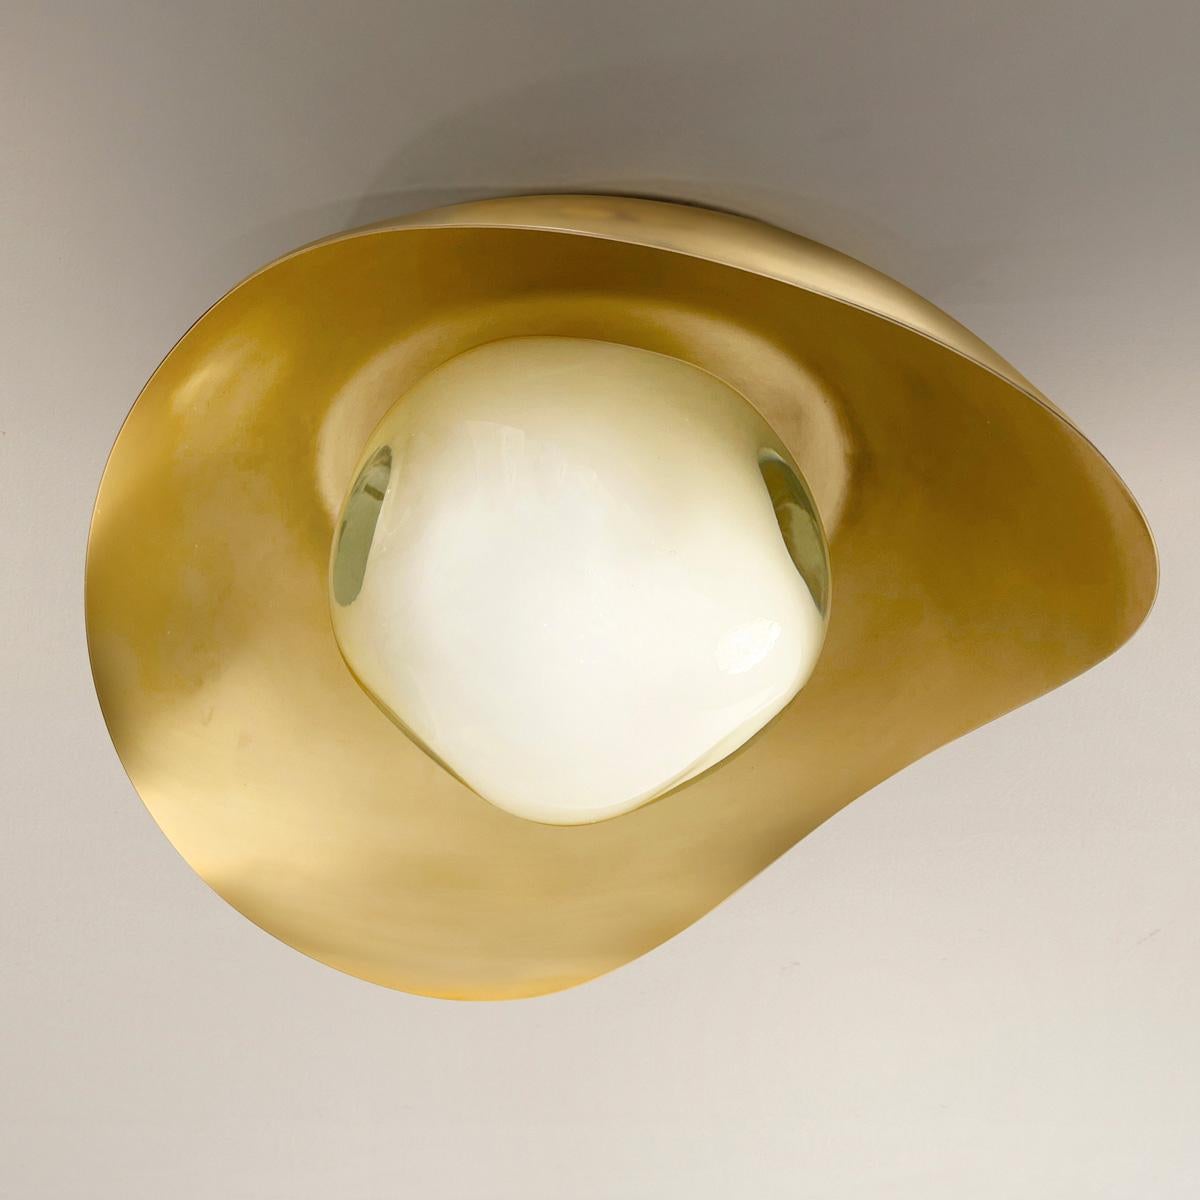 Perla Flushmount Ceiling Light by Gaspare Asaro-Brass Finish In New Condition For Sale In New York, NY